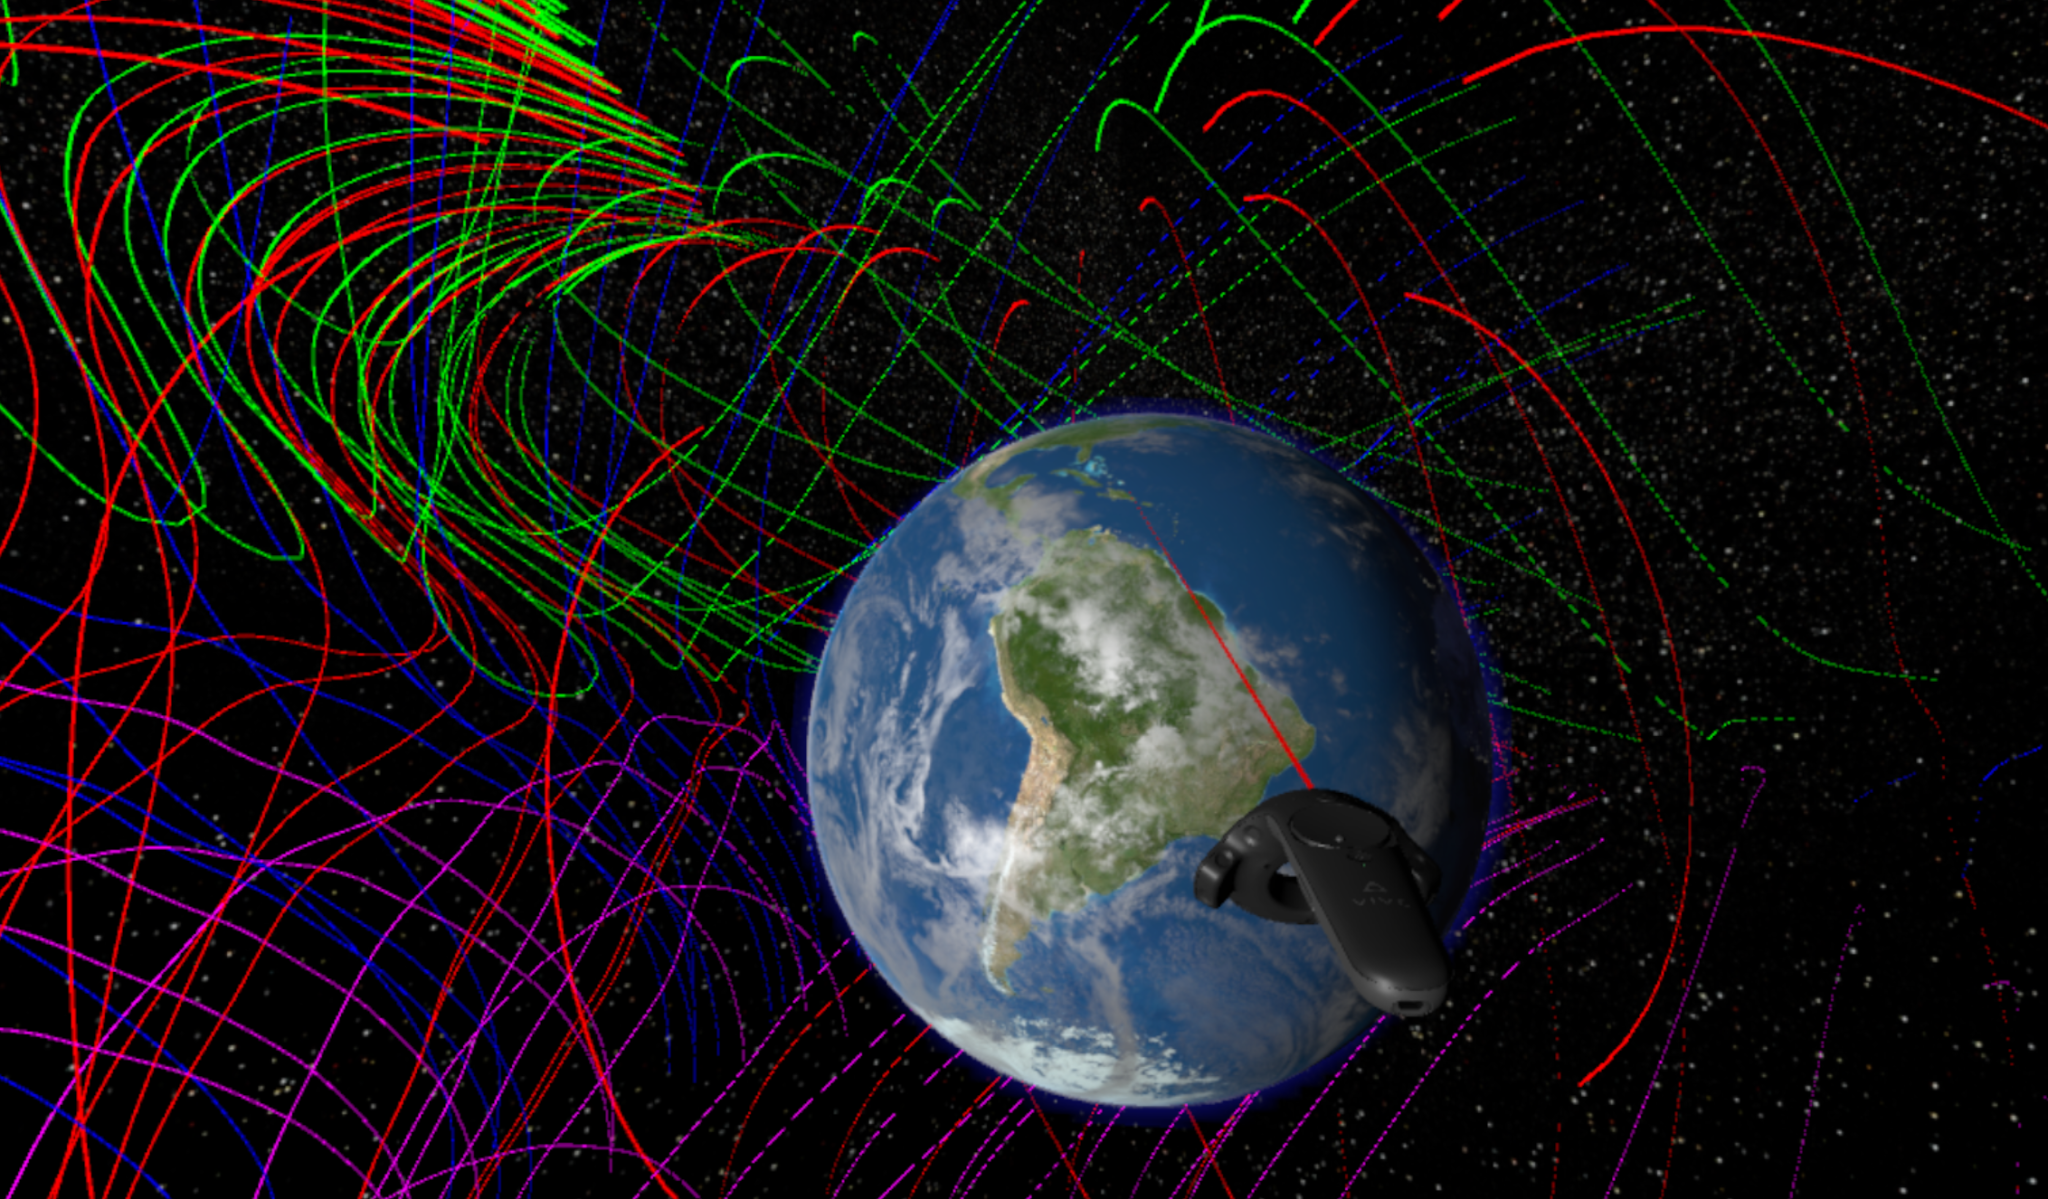 Virtual reality screen with model of Earth showing South American and many colorized curved lines showing magnetic connections in Earth's magnetosphere